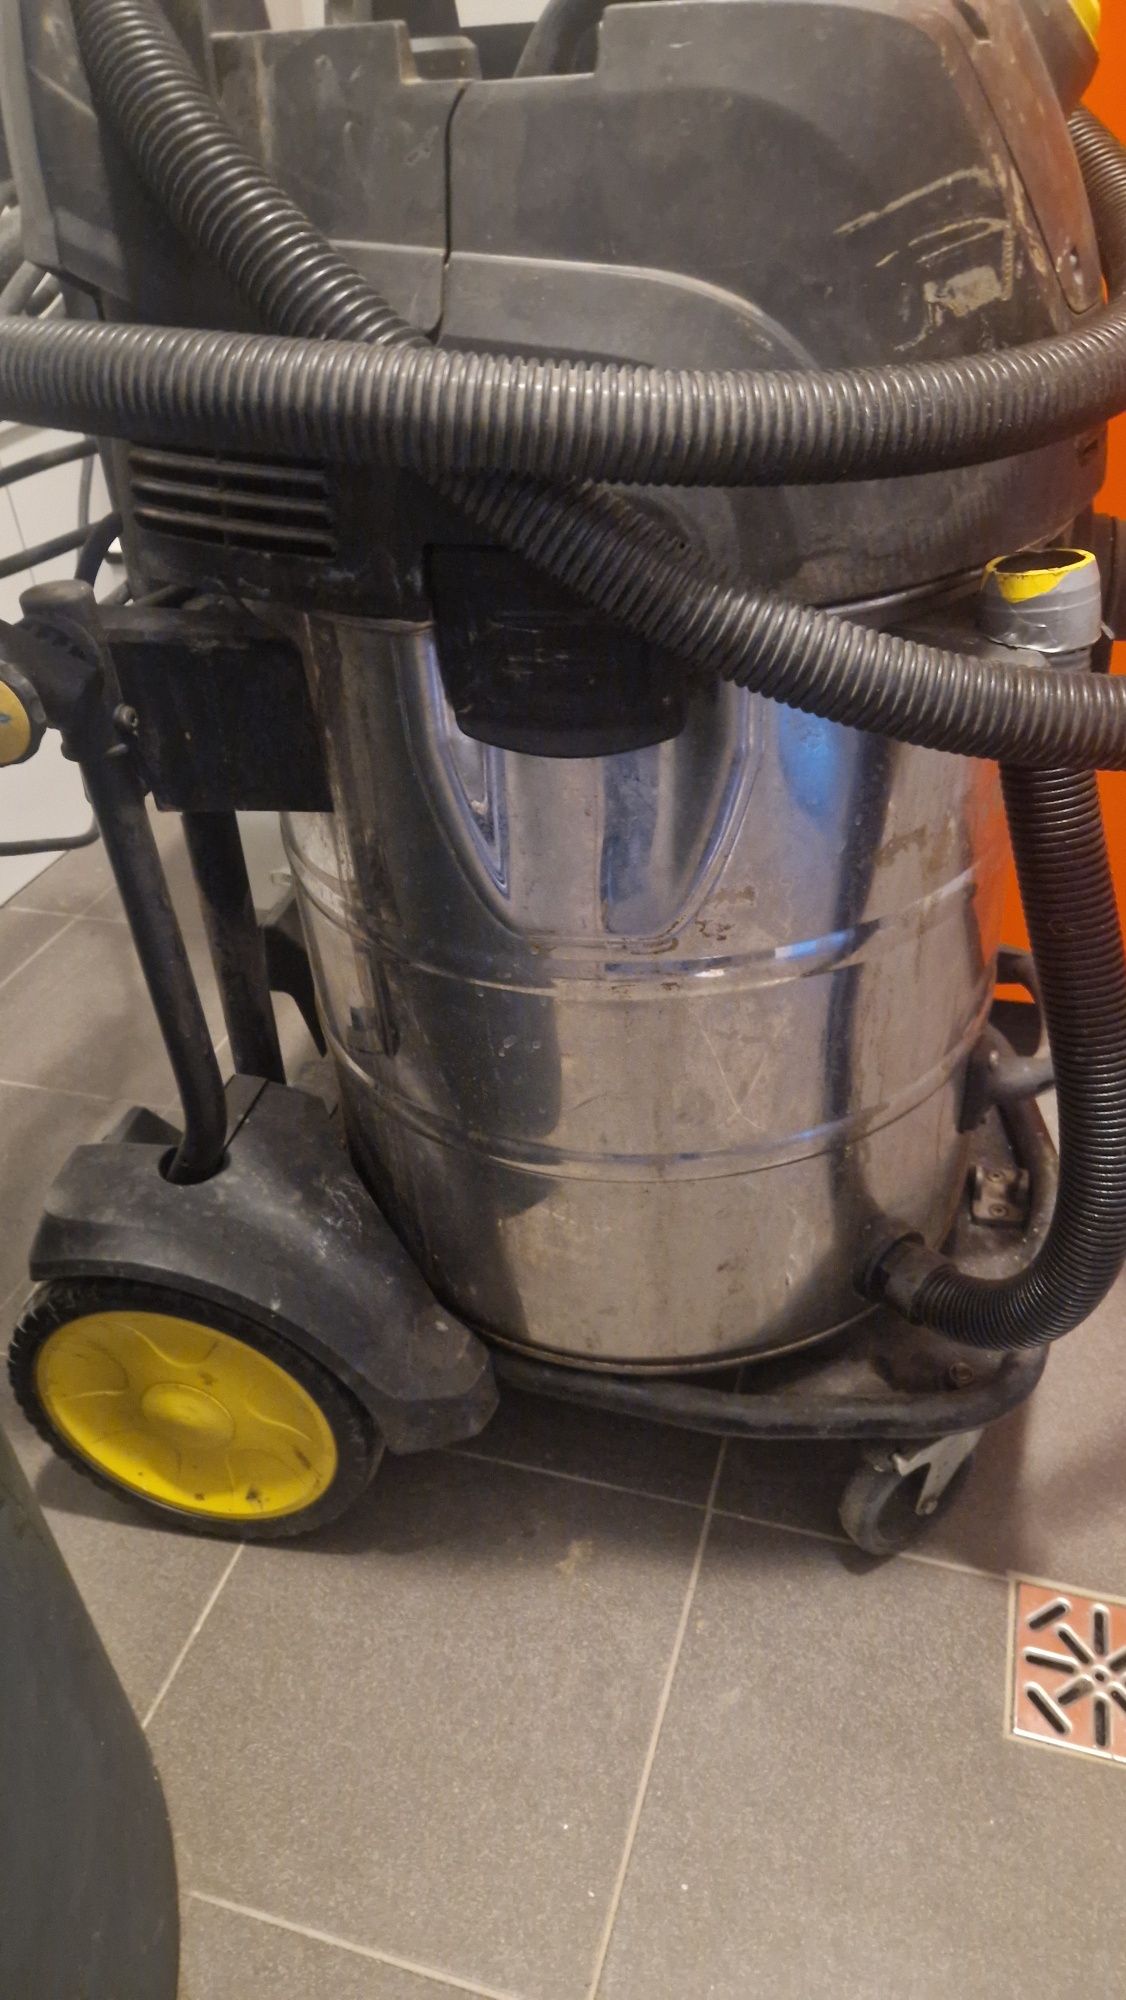 Karcher NT/75 Tact Professional